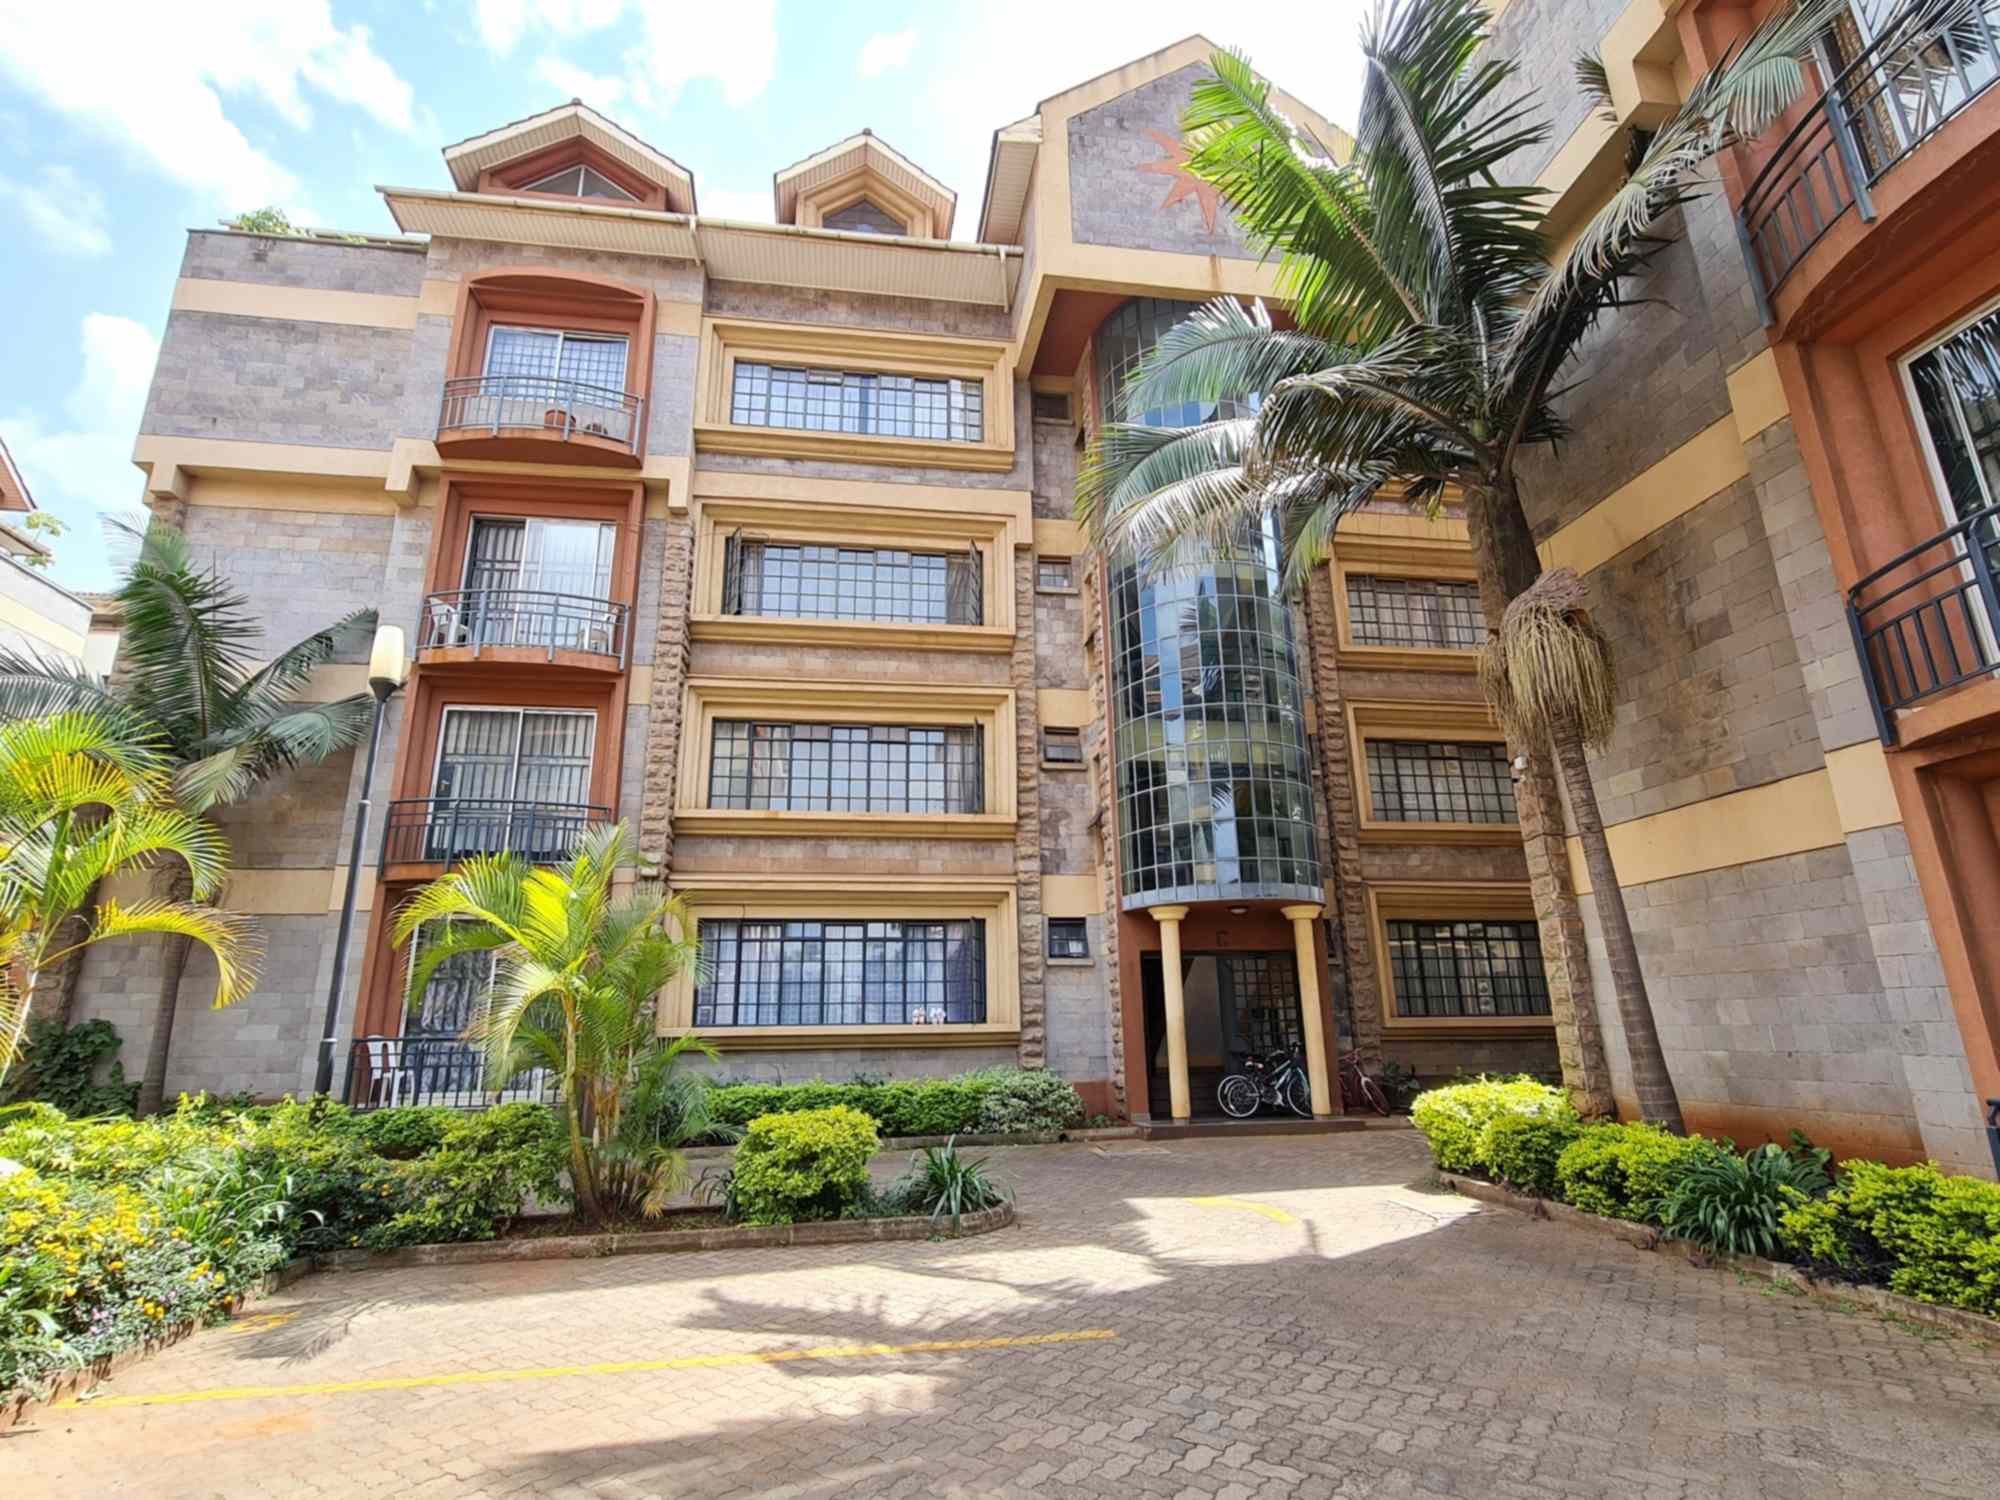 3 bedroom furnished apartment for rent in Lavington